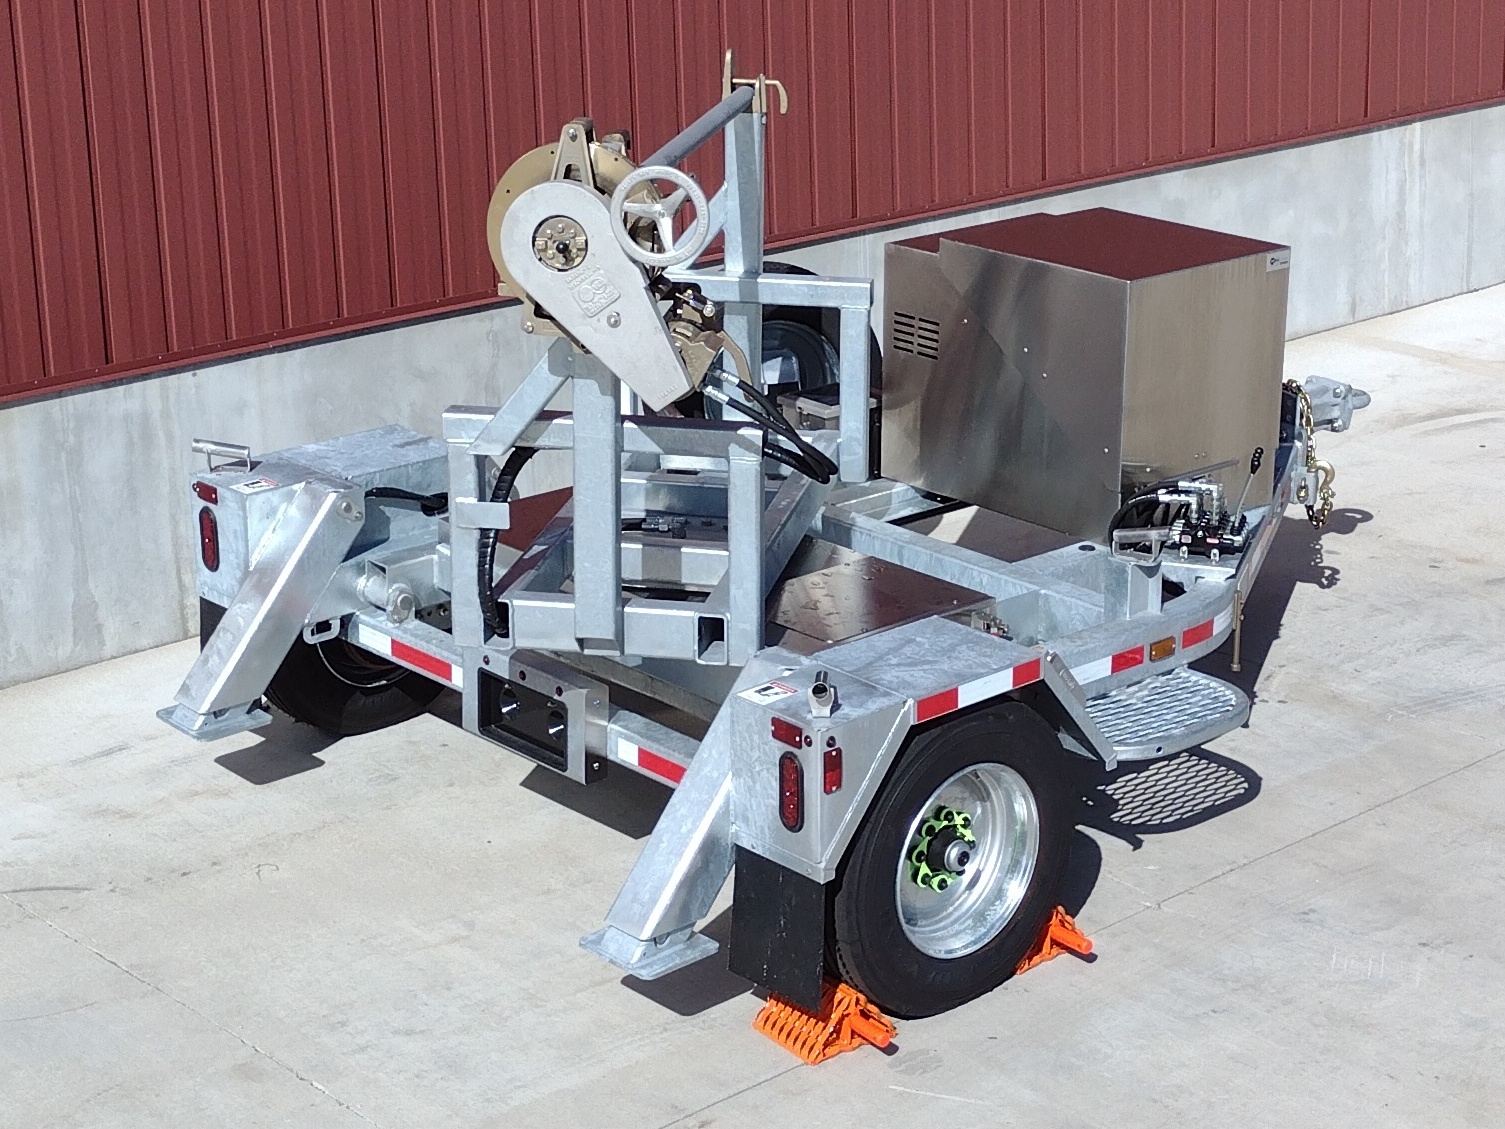 Right rear view of a Sauber Mfg. Co. Model 1519-SL Self-Loading Turret Trailer partially rotated for conductor payout. The trailer is shown on concrete in front of a red metal building.